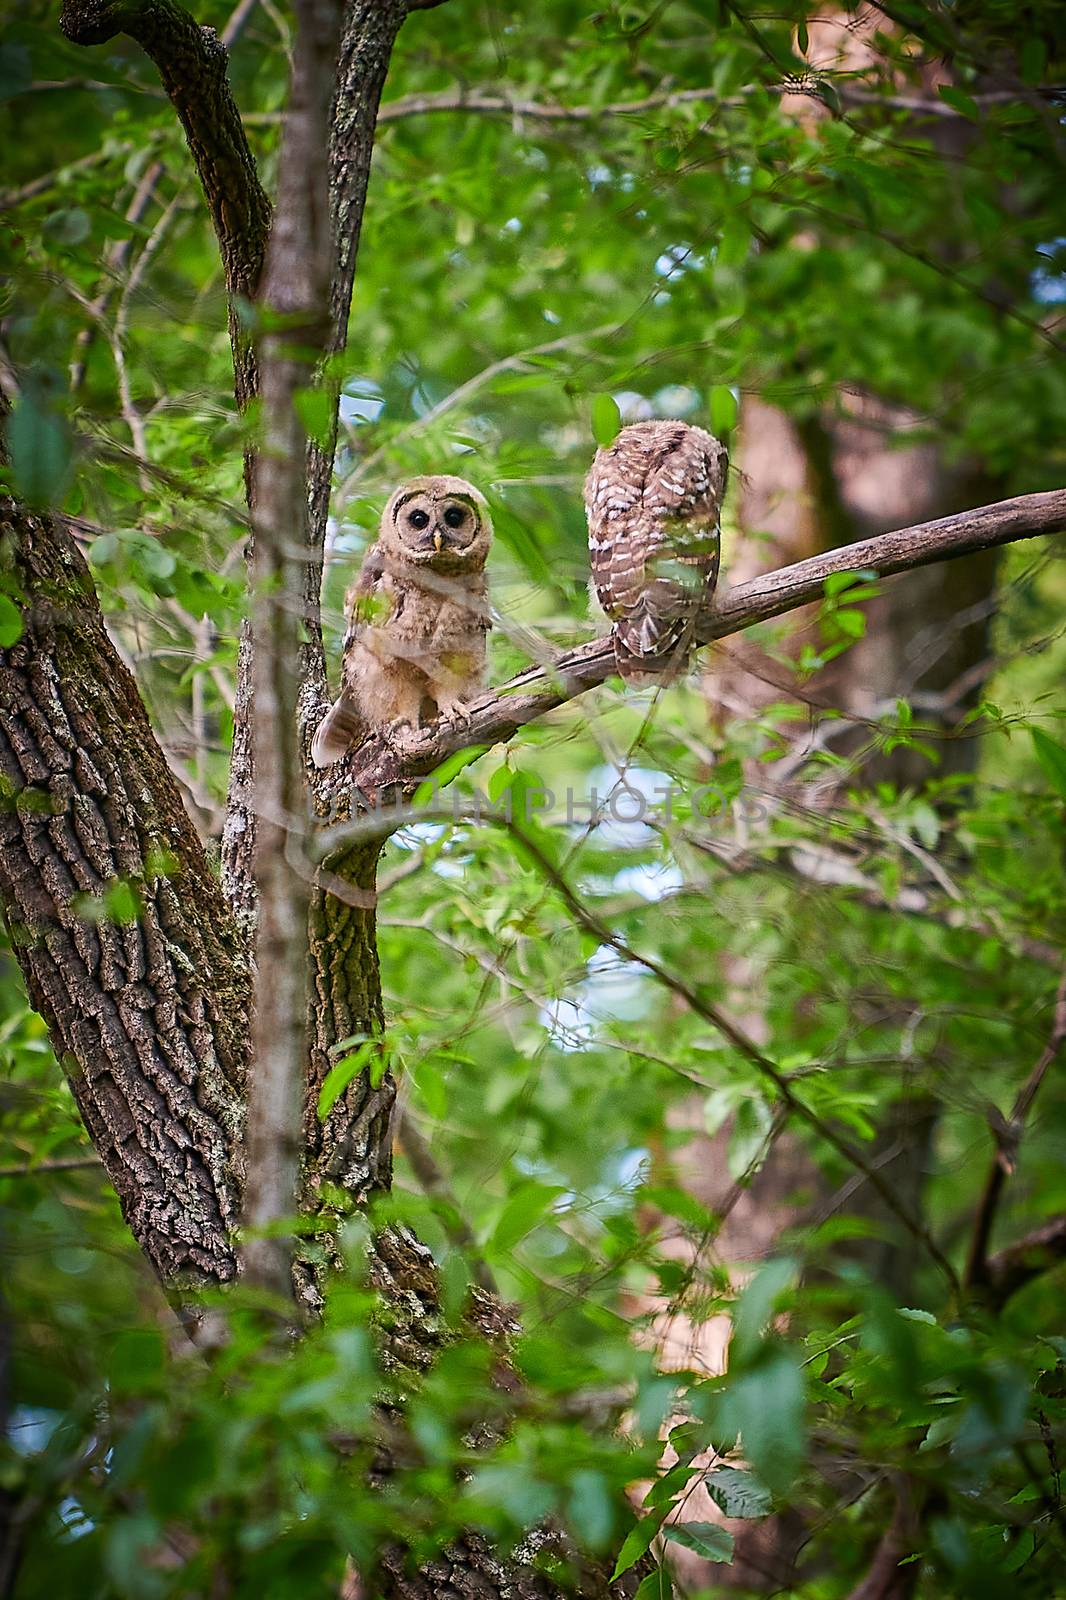 Juvenile Barred Owls sitting in a tree.